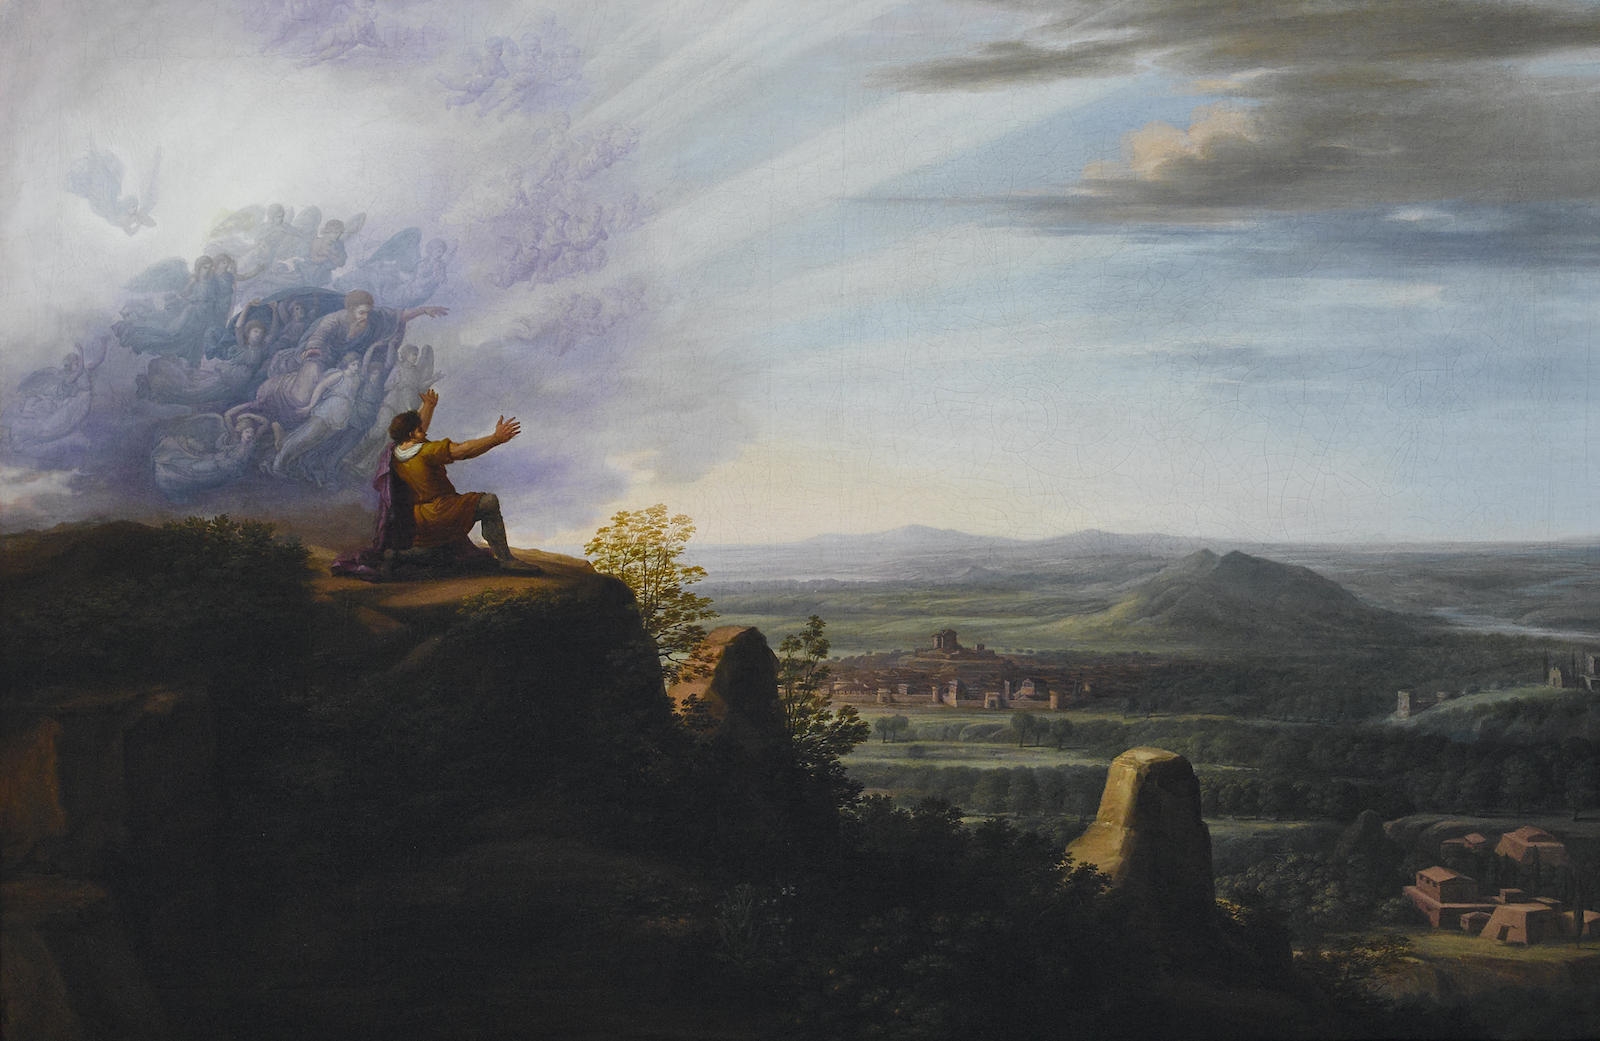 Artwork by Carl Ludwig Kuhbeil, God showing Moses the Promised Land from the top of Mount Nebo, Made of oil on canvas